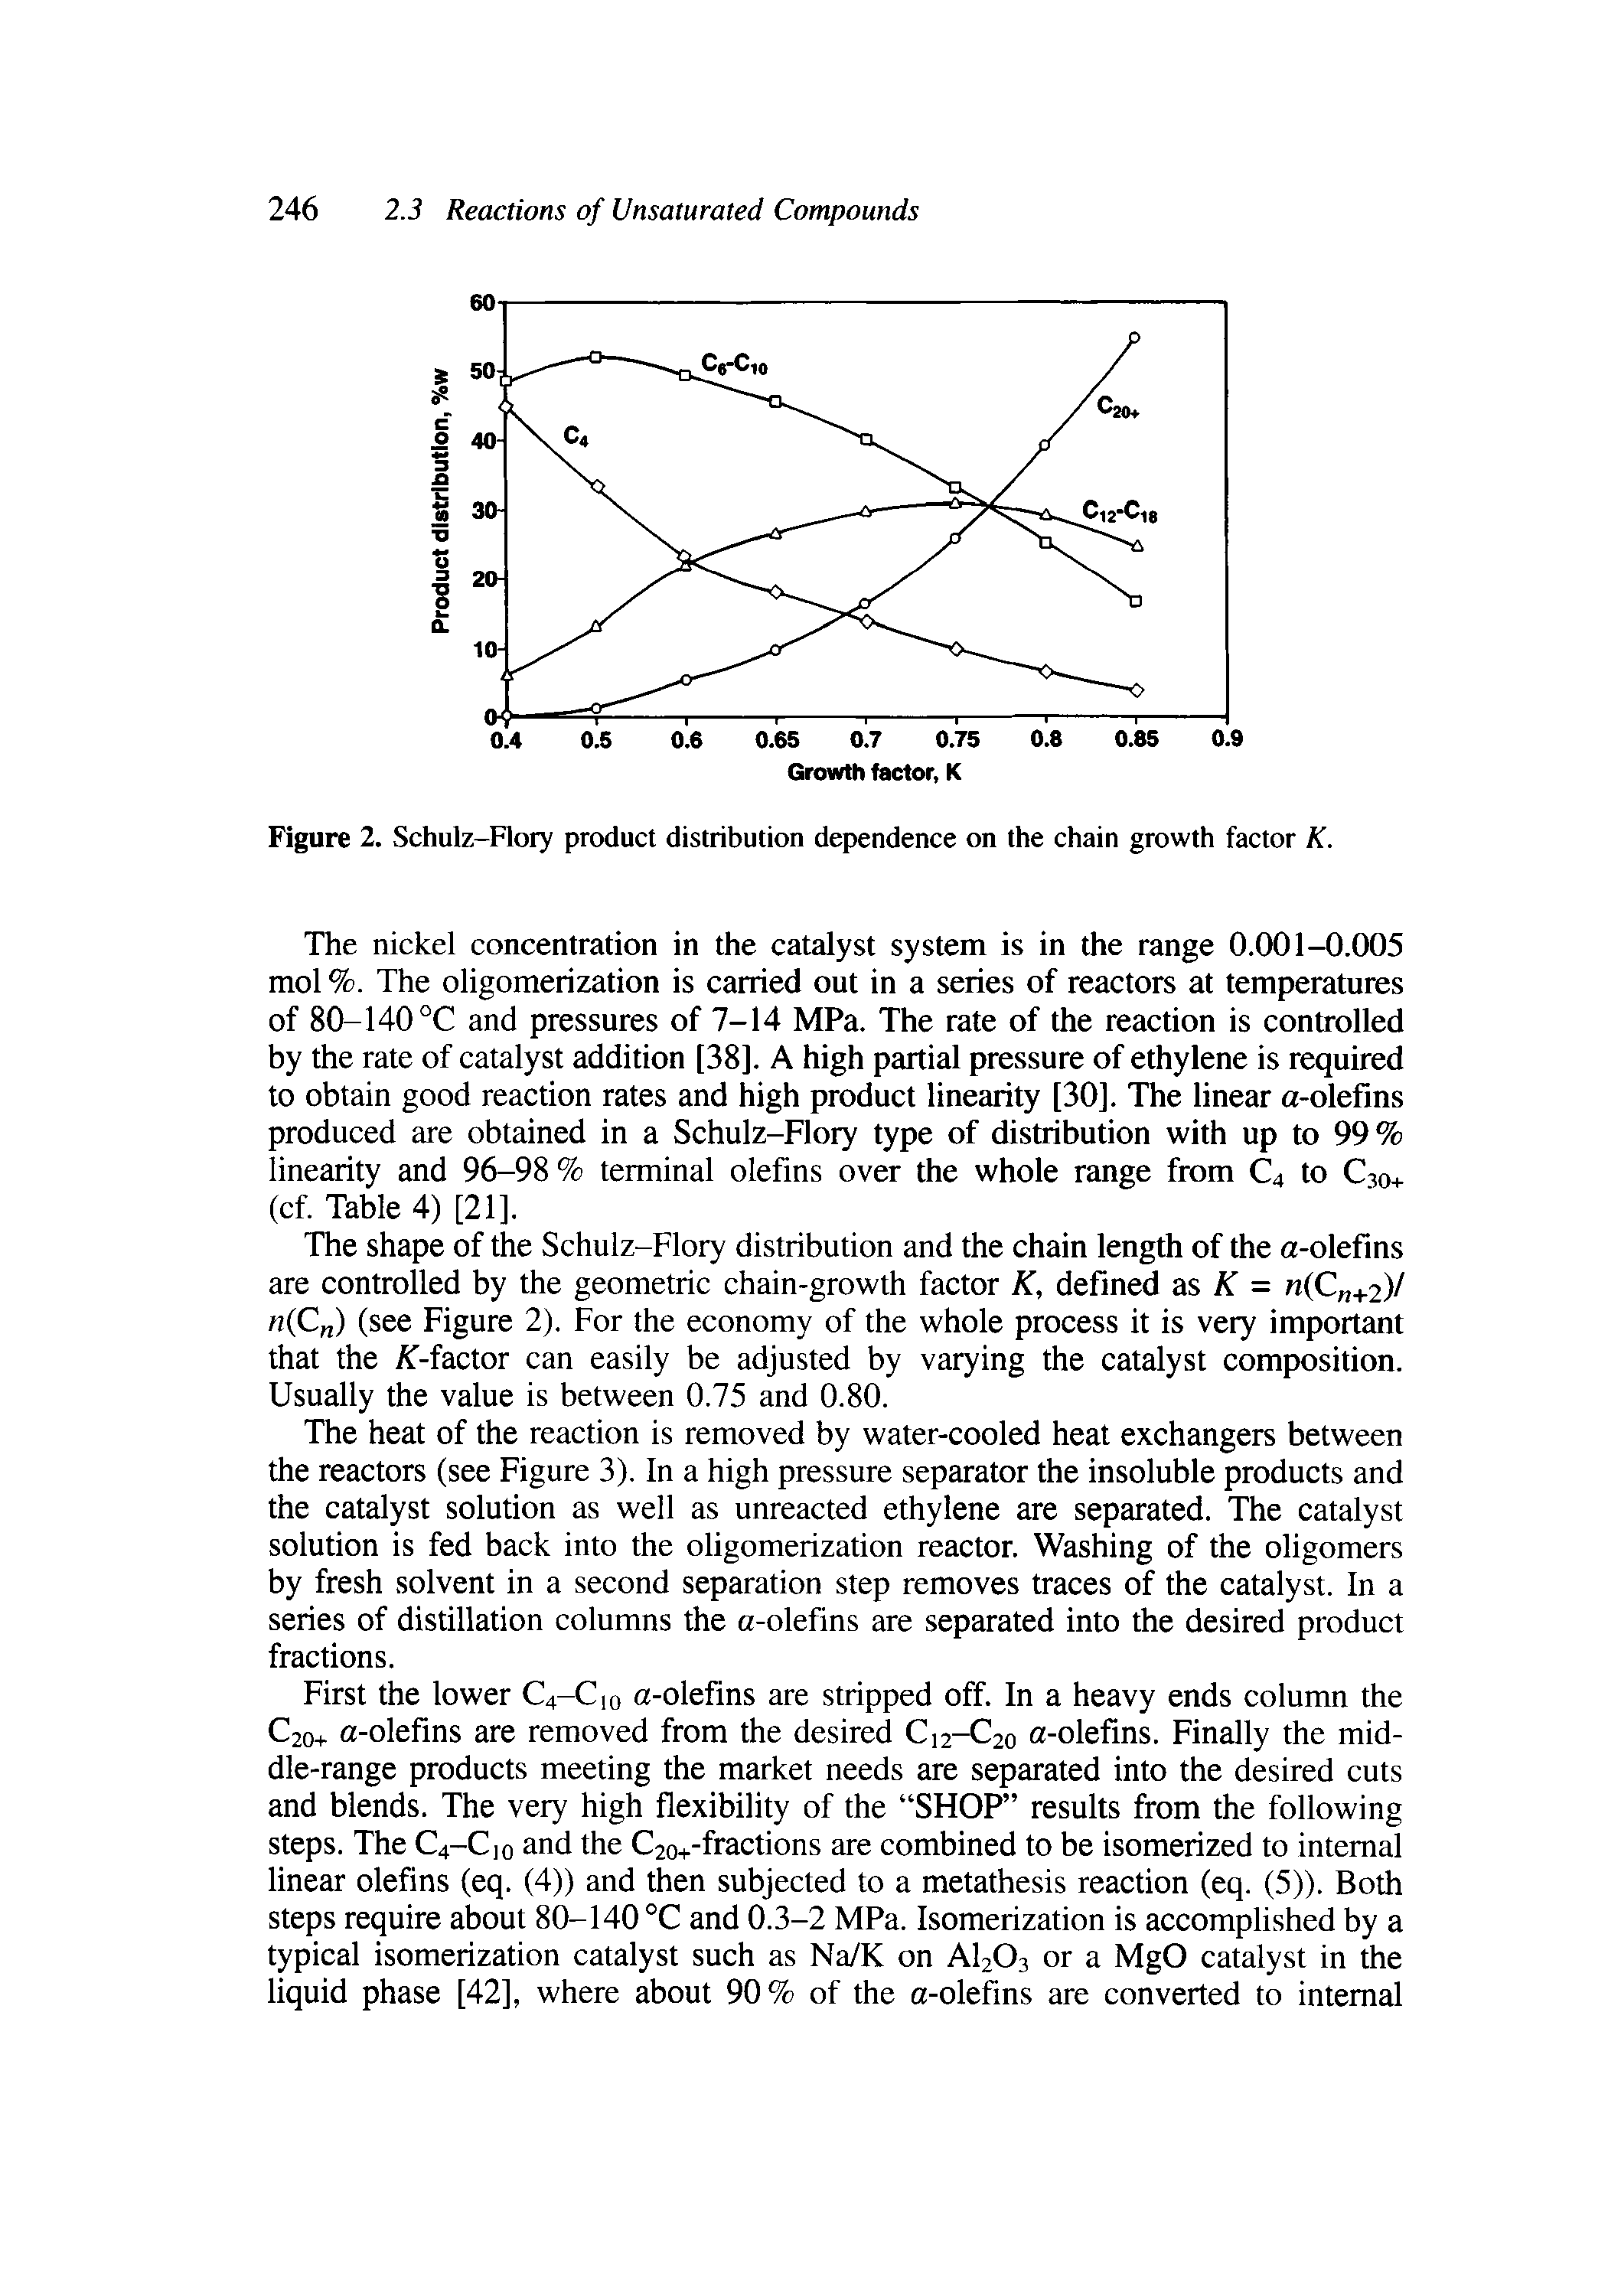 Figure 2. Schulz-Flory product distribution dependence on the chain growth factor K.